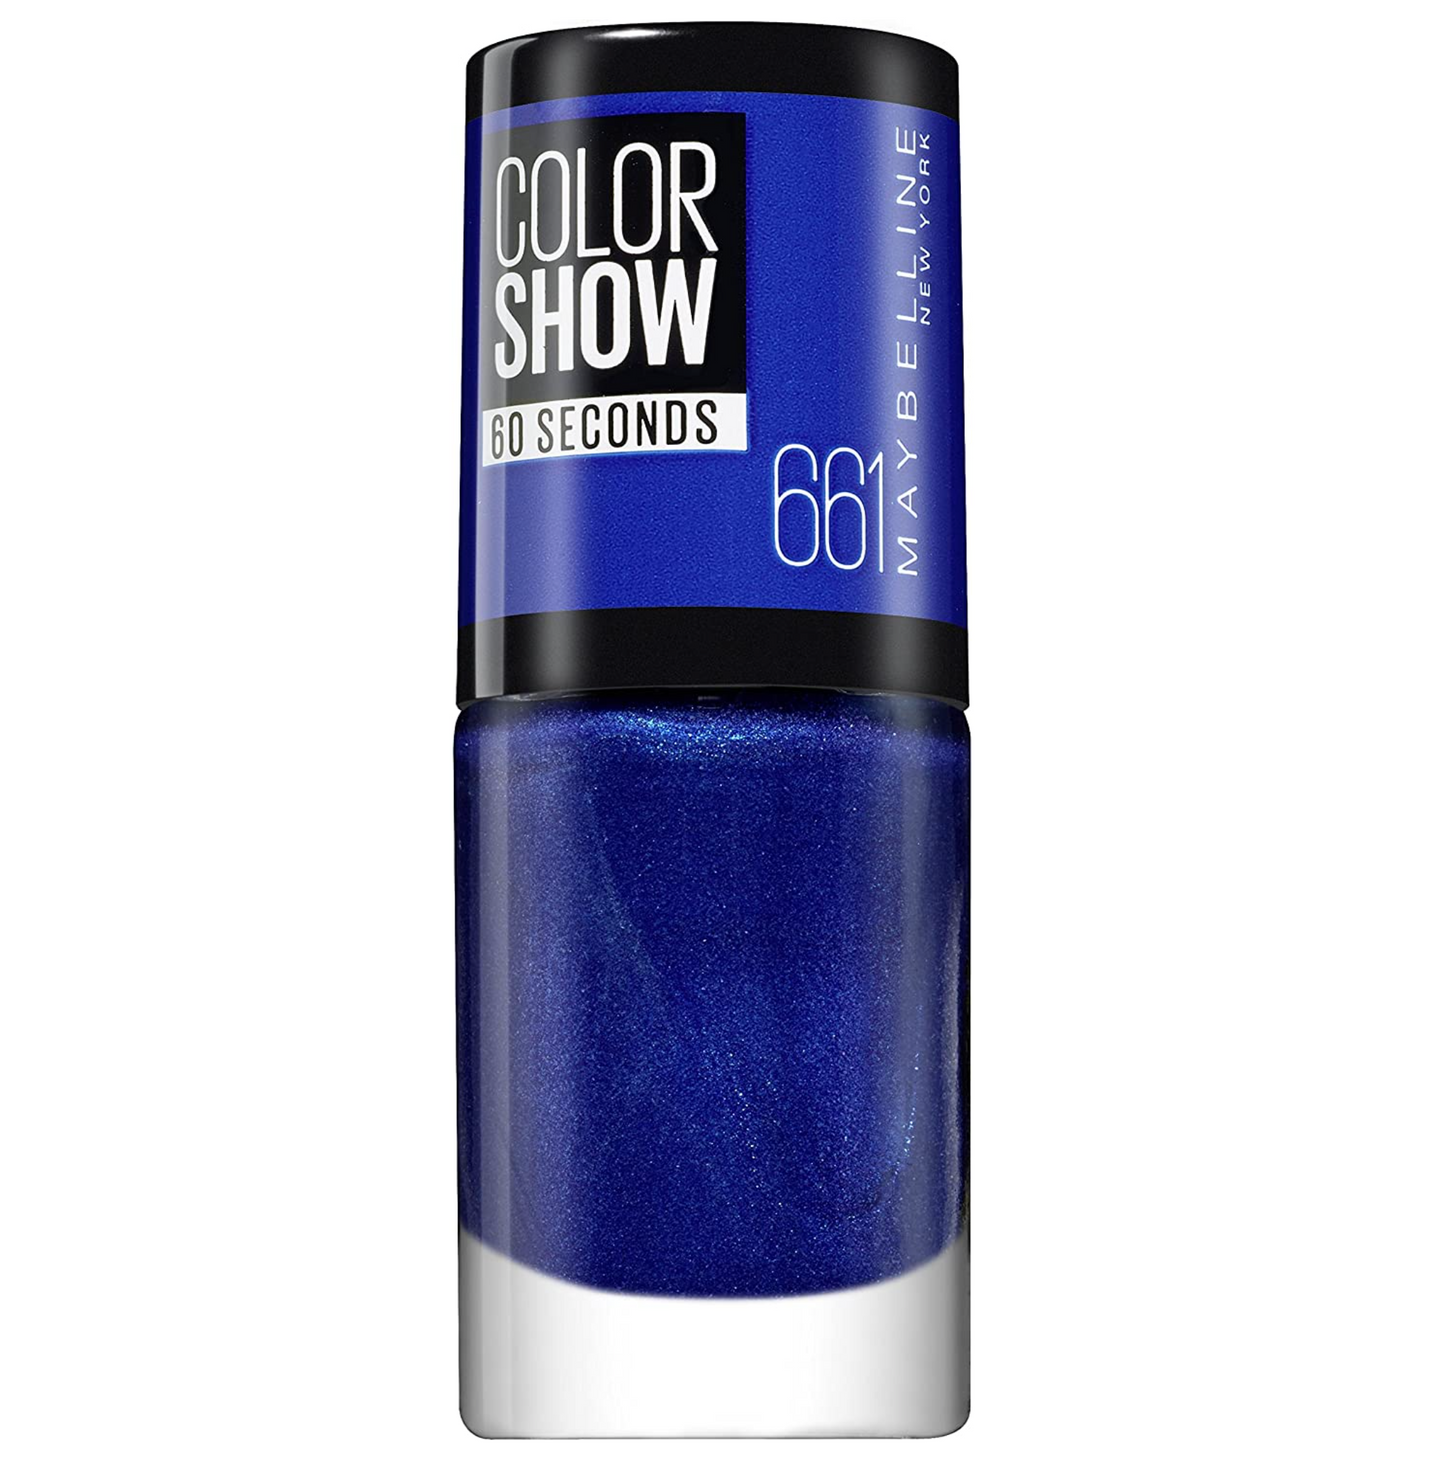 Maybelline Color Show Nail Polish - 661 Ocean Blue